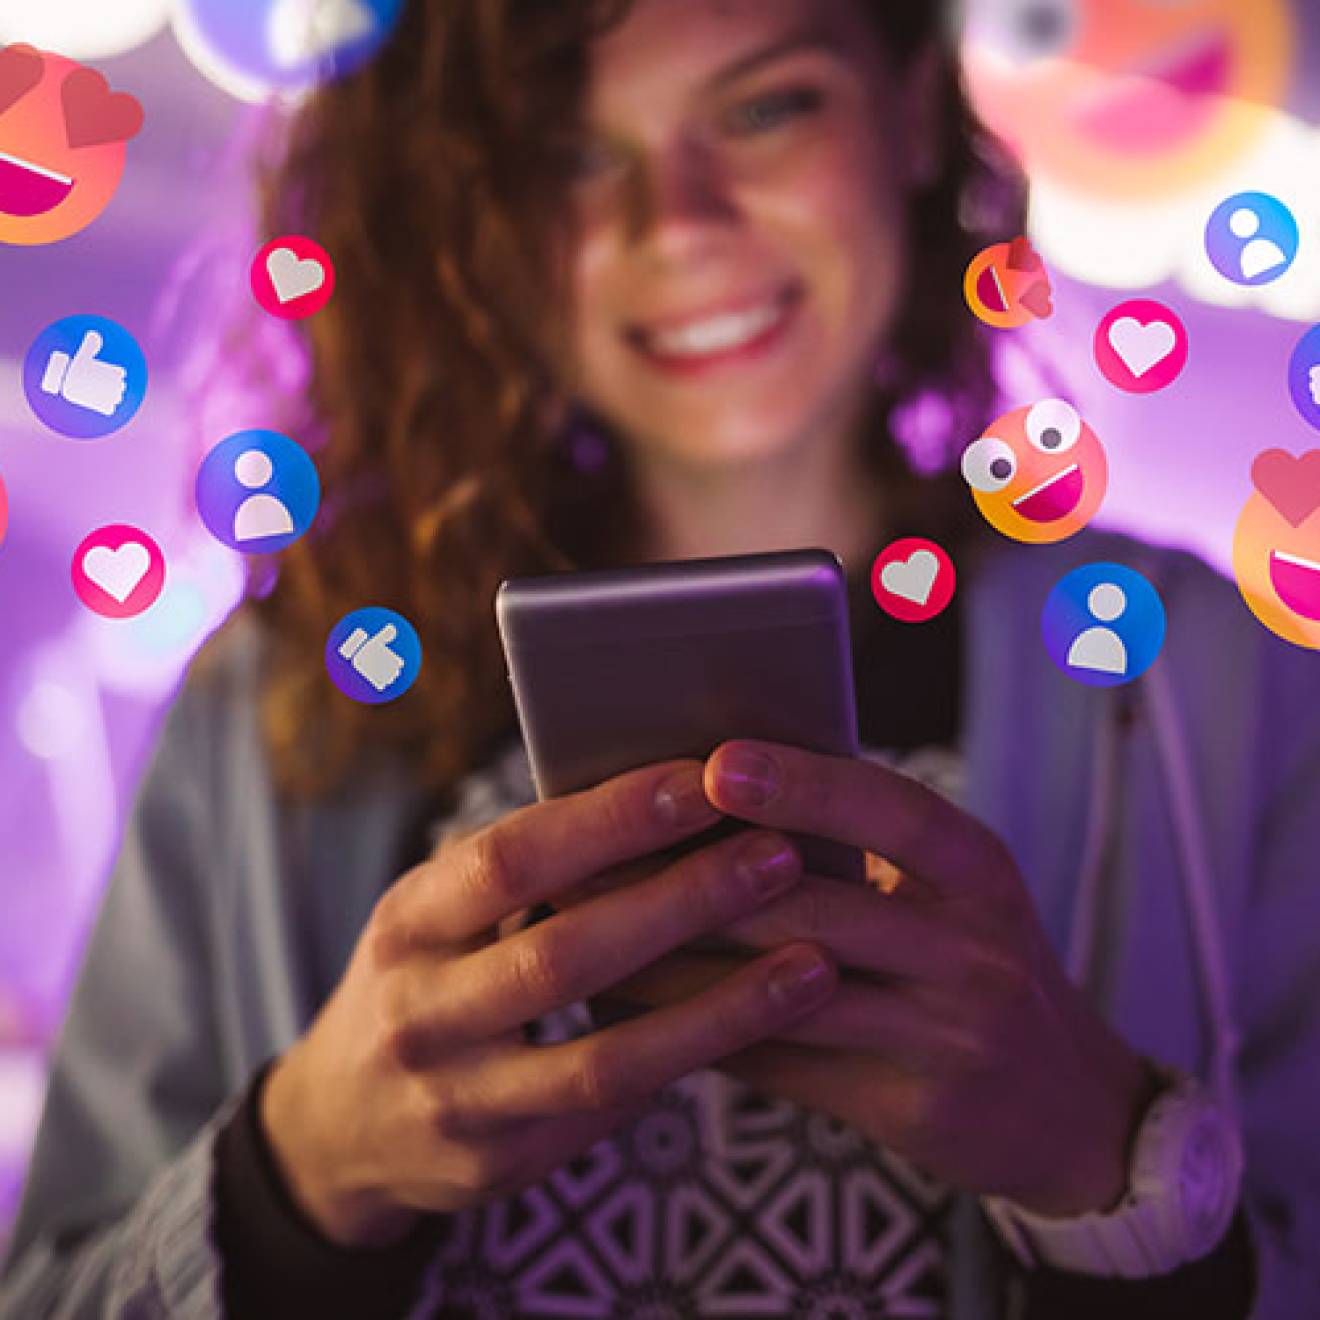 Happy young woman using her phone with emojis surrounding her